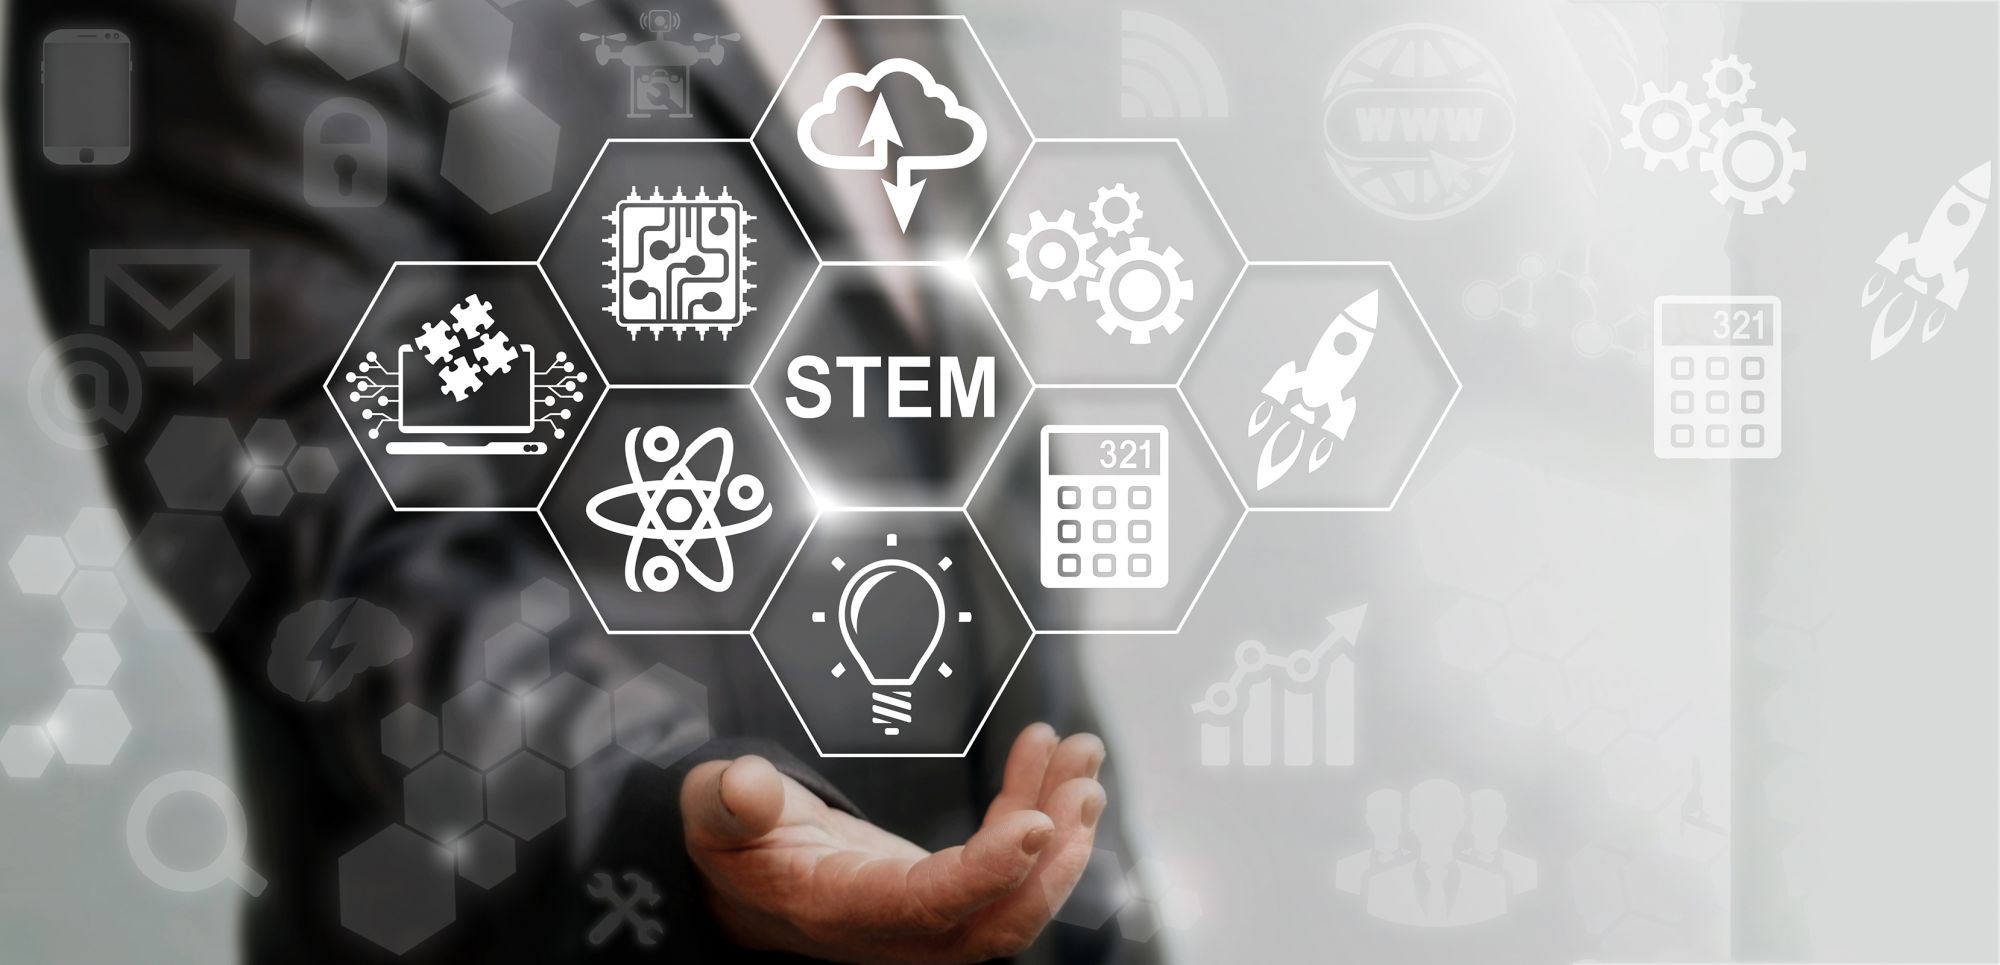 stylized image of hand holding graphic of STEM sciences